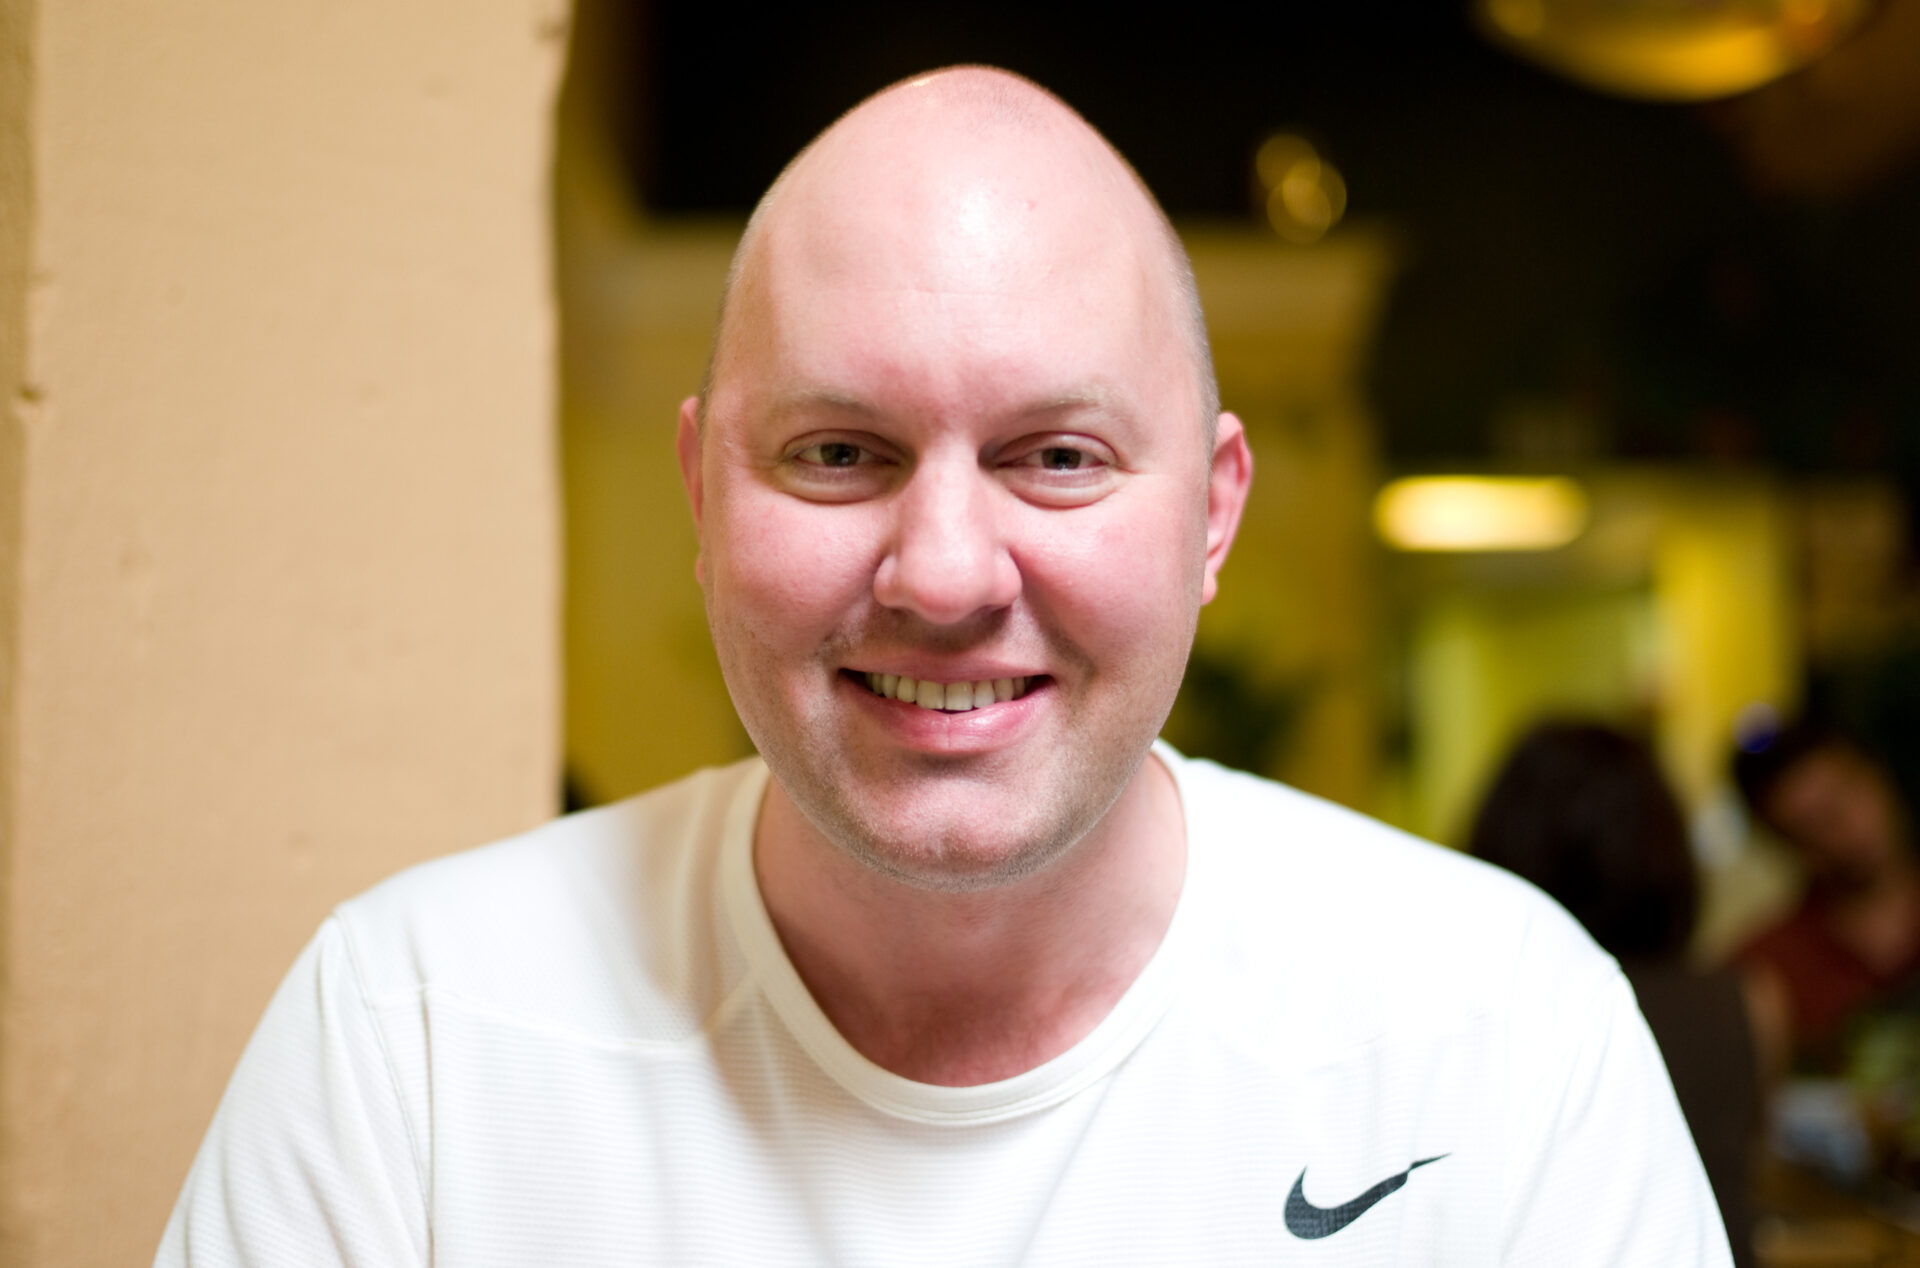 Marc Andreessen (Photo by N01 on Flickr (CC BY 2.0) )